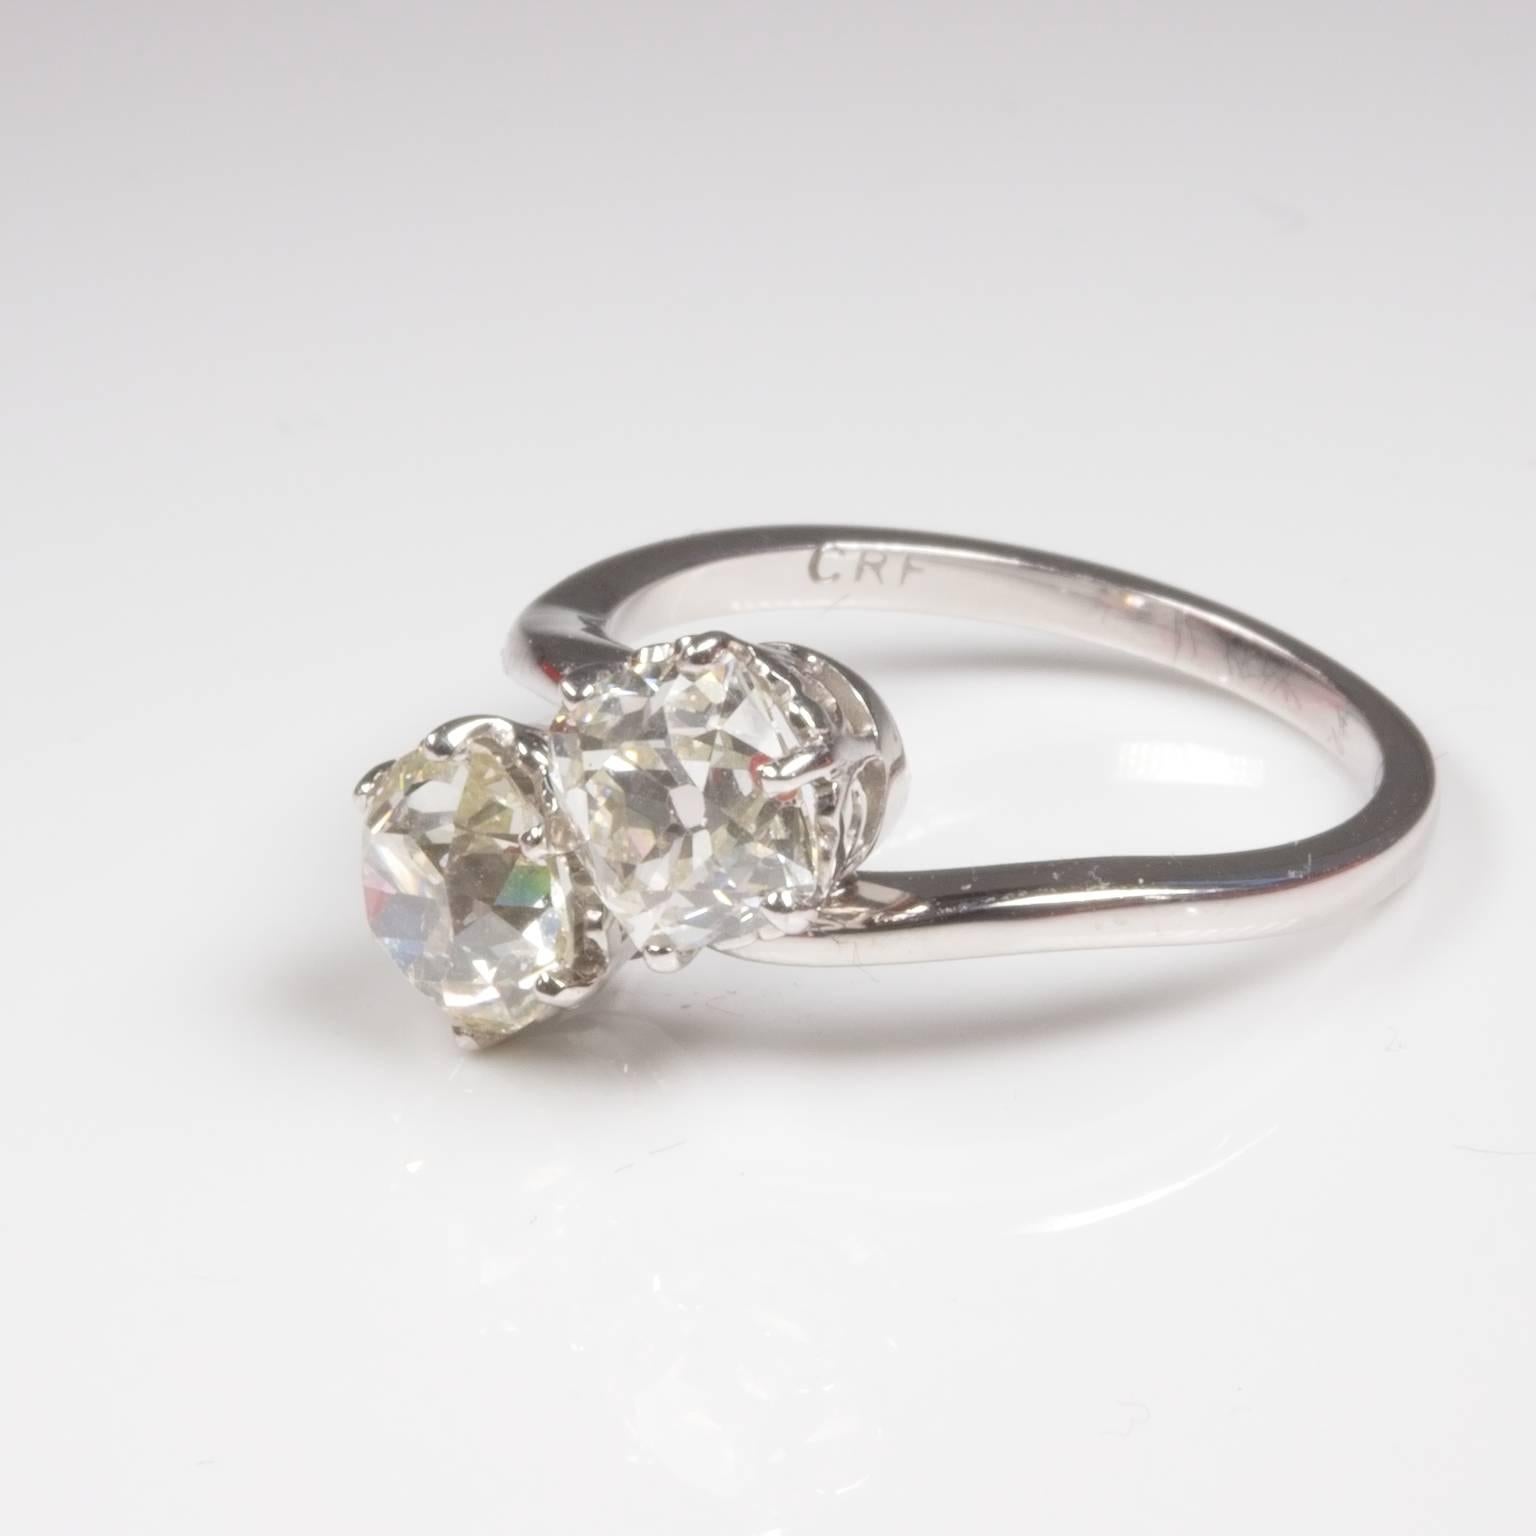 Romatic Toi et Moi (You and Me) 2 Diamond ring in 18ct white gold set with 2 nicely matched old mine cut diamonds of 1.11ct J/VS2 and 1.13ct I/VS1. Lovely heart cutouts on the crown. Total diamond weight 2.24ct. Currently size M (US=6 1/2) and will